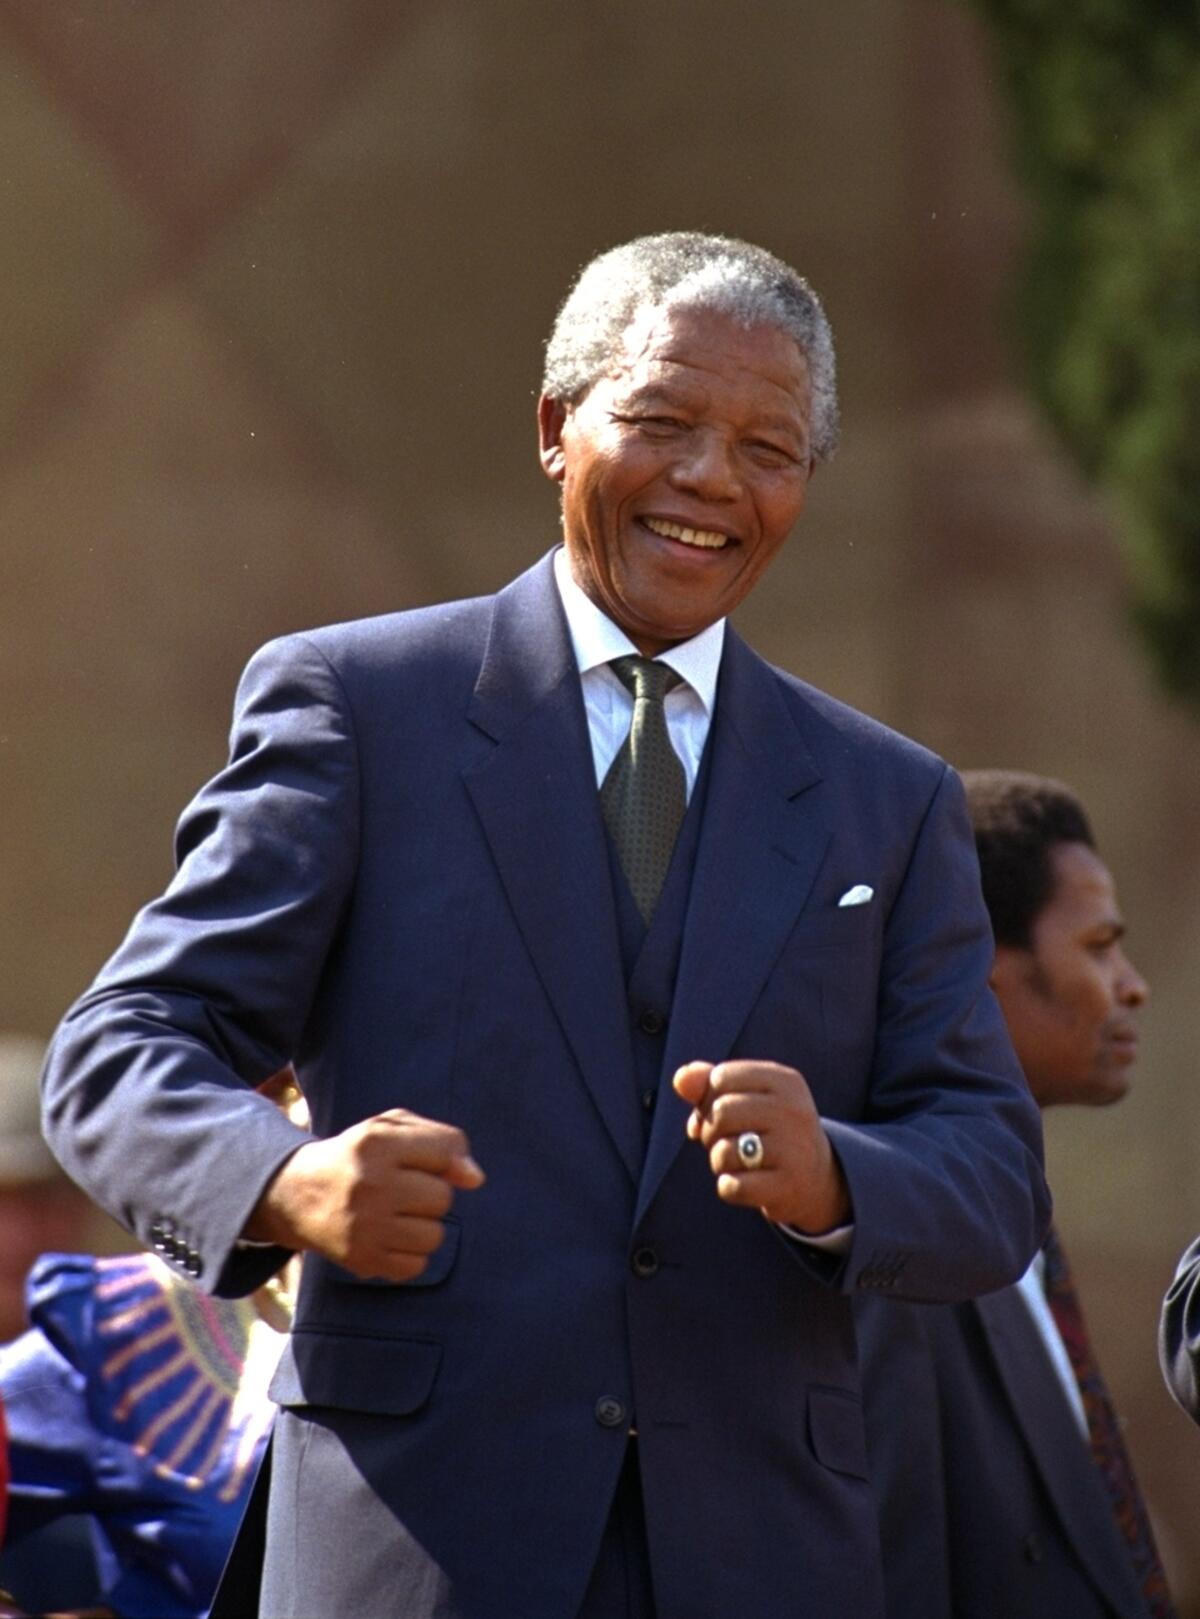 Nelson Mandela dances at a celebration concert following his inauguration as president of South Africa